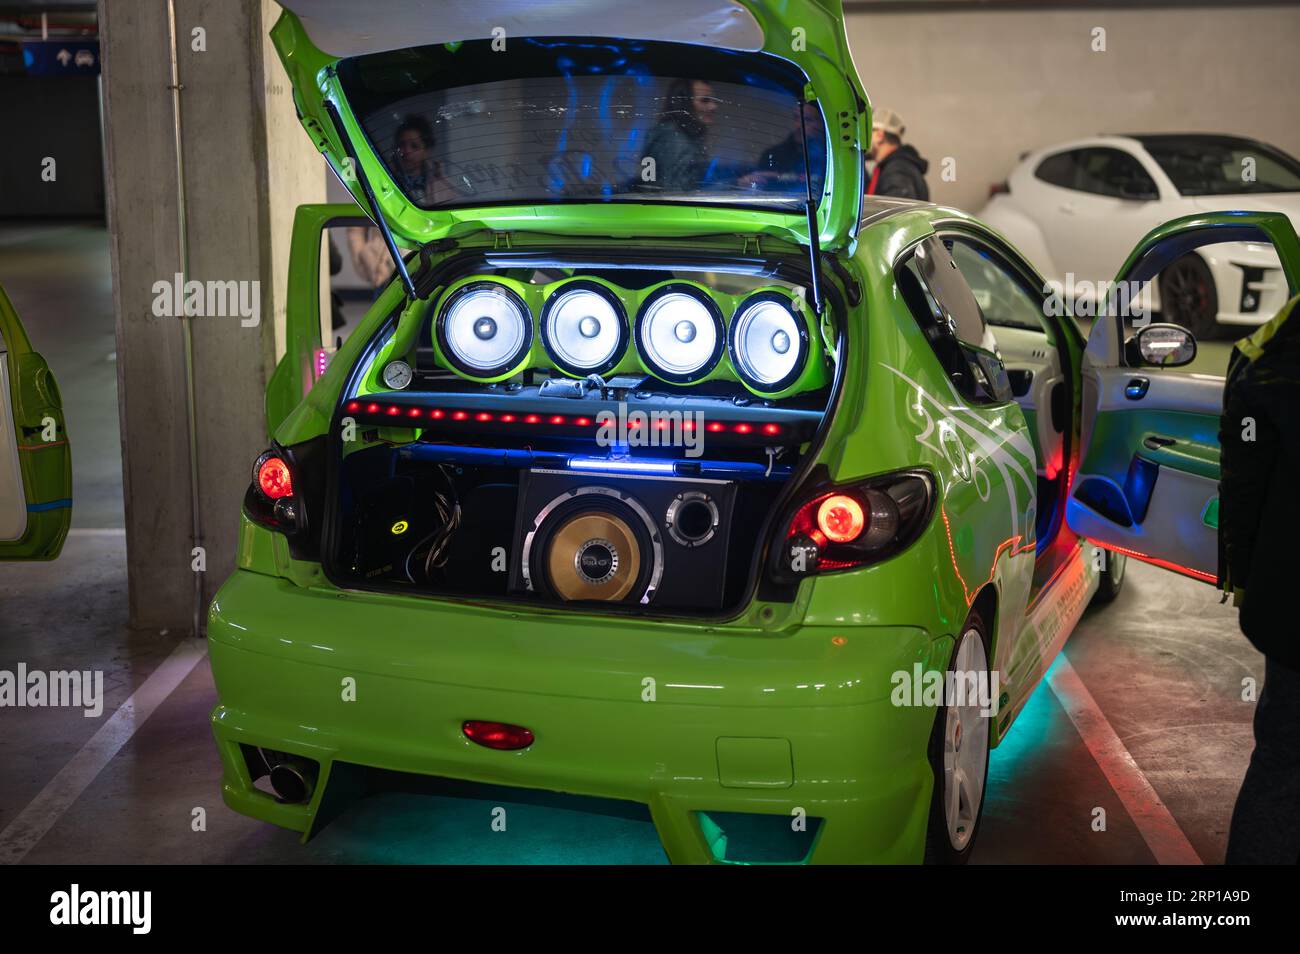 A tuned green Peugeot 206 with the trunk open and full of loudspeakers playing music at a tuning car meetup Stock Photo